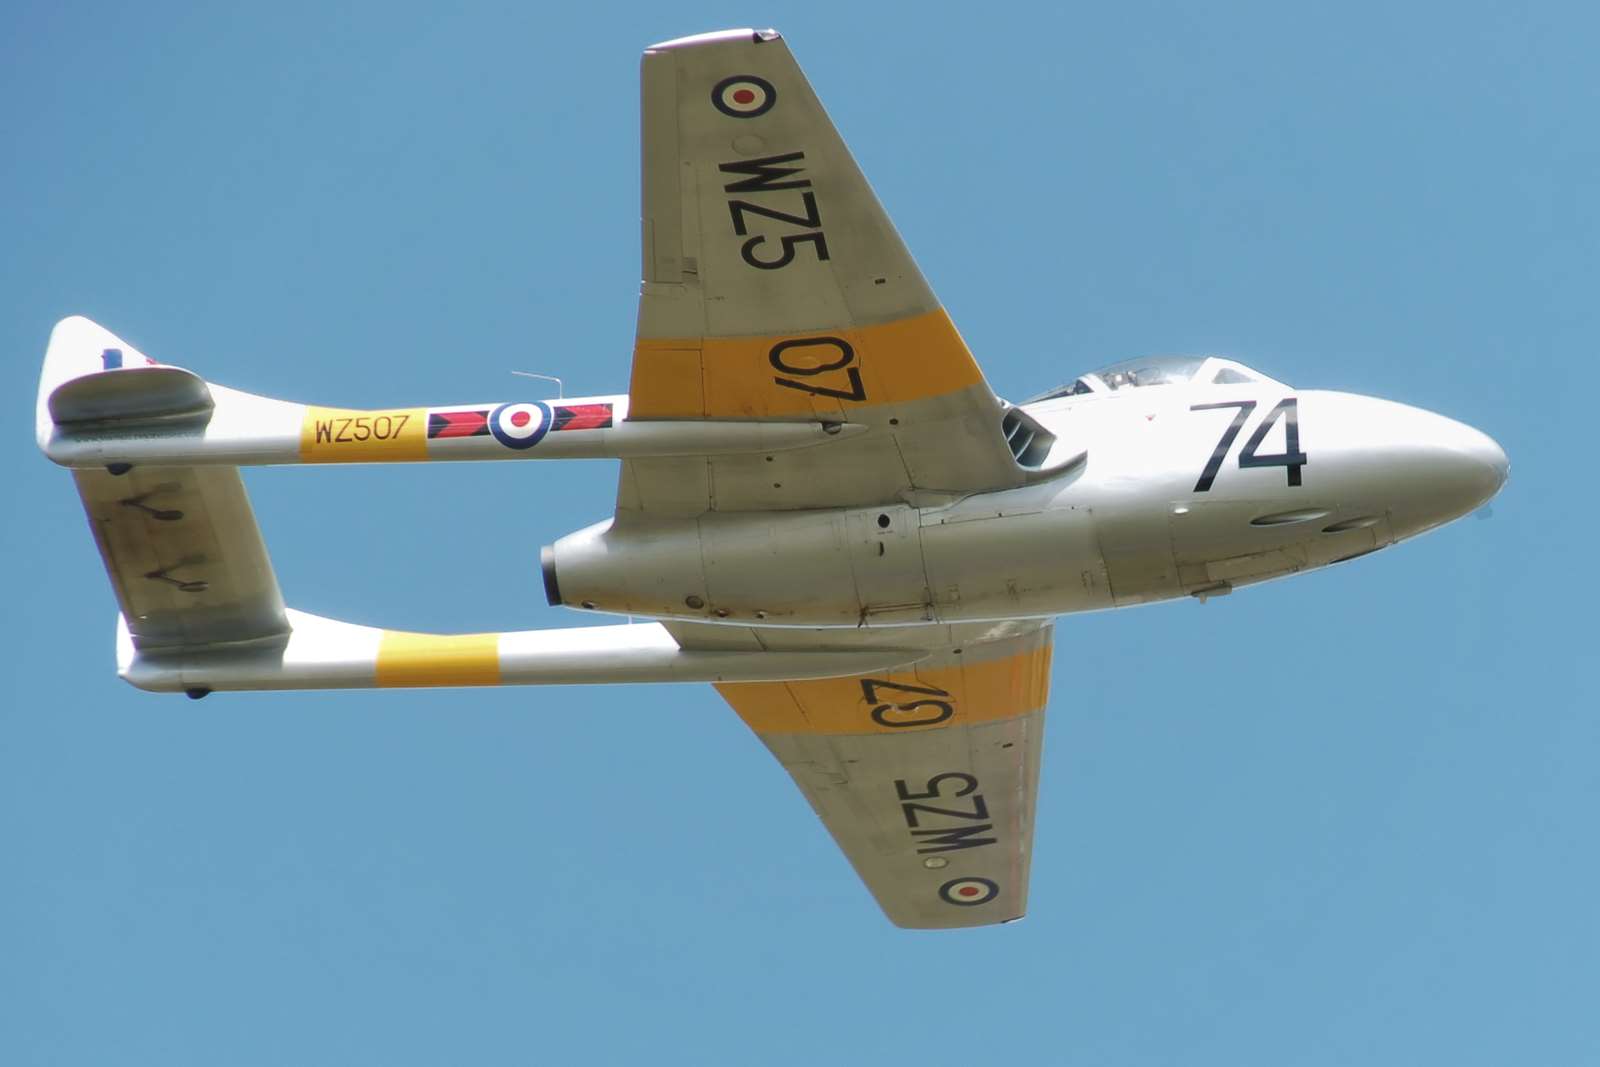 The De Havilland Vampire could feature at this year's Herne Bay Air Show